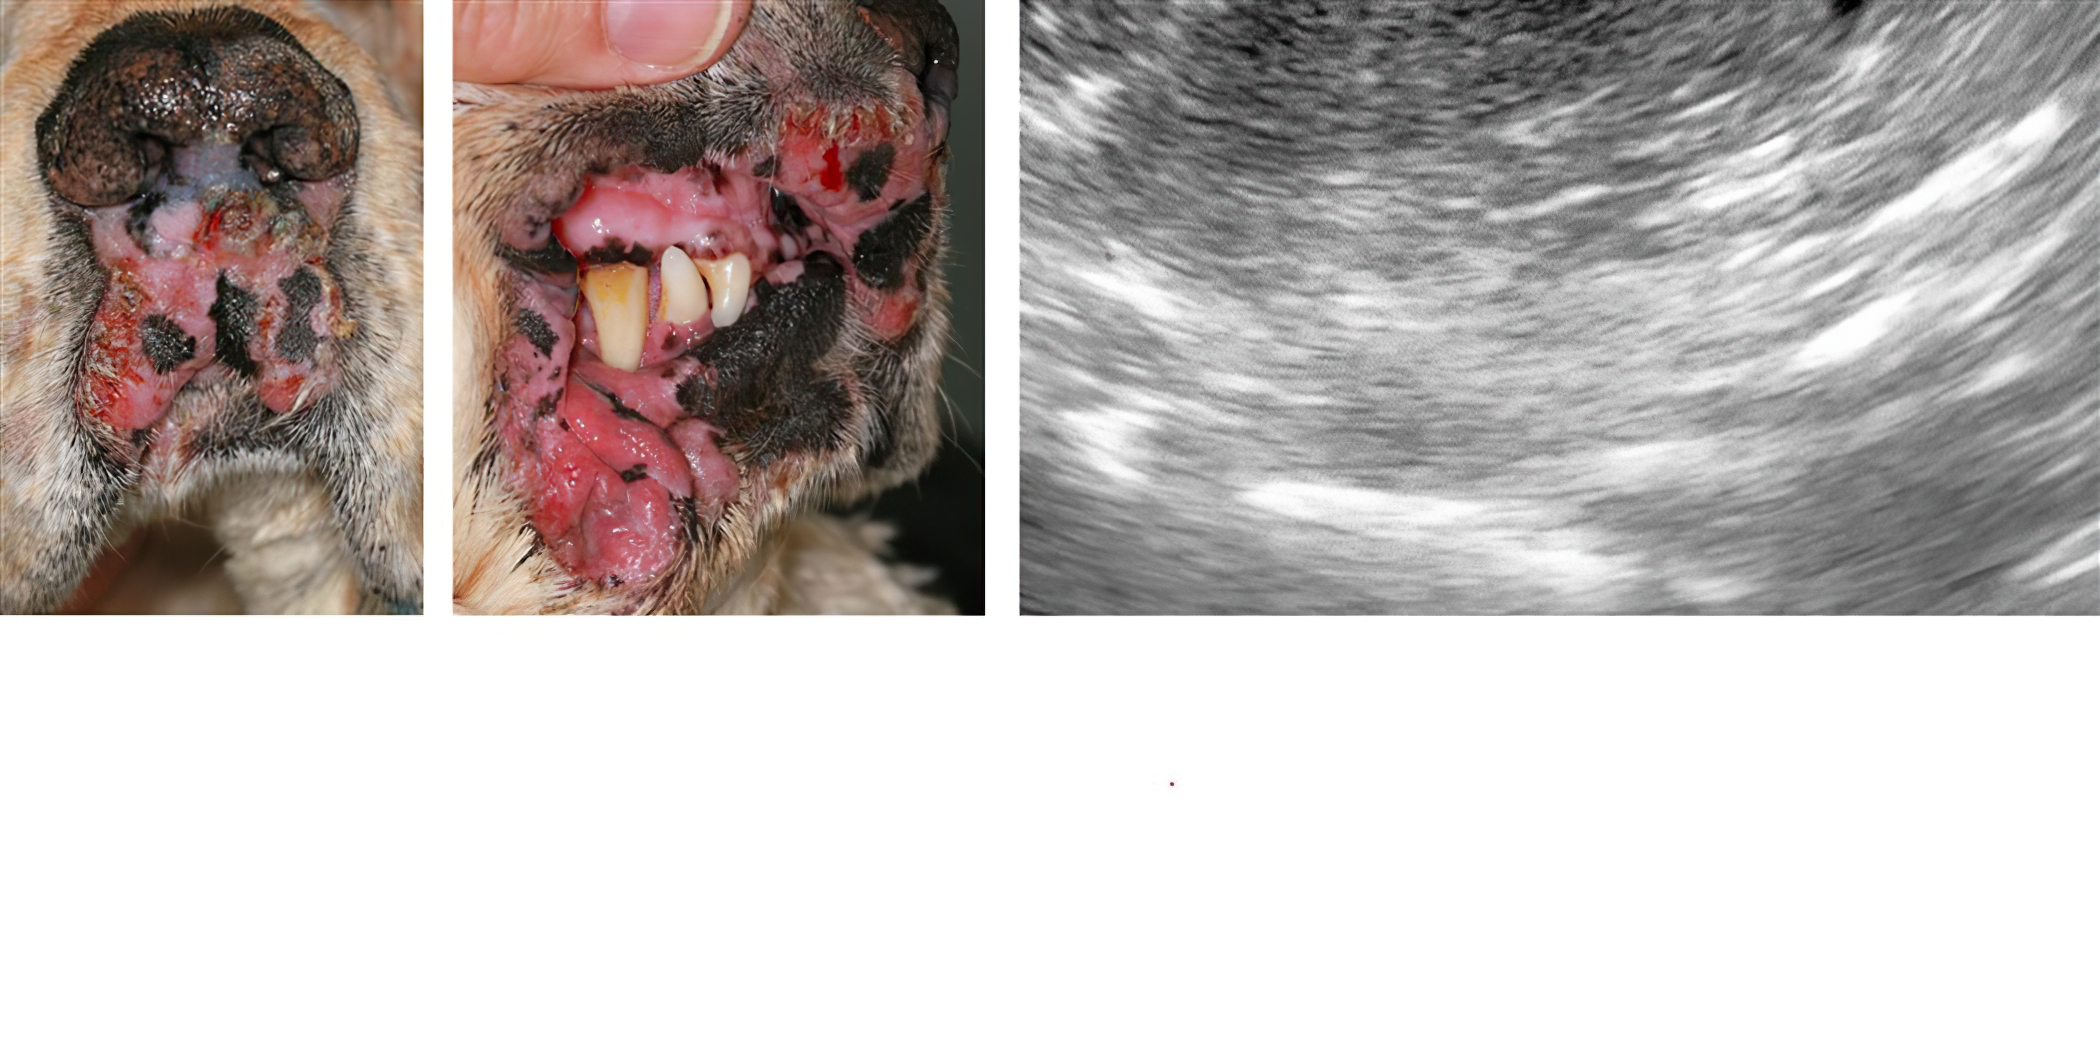 Cocker Spaniel with Concurrent Skin & Liver Lesions: Hepatocutaneous Syndrome, Cutaneous Lymphoma, Drug Reaction?